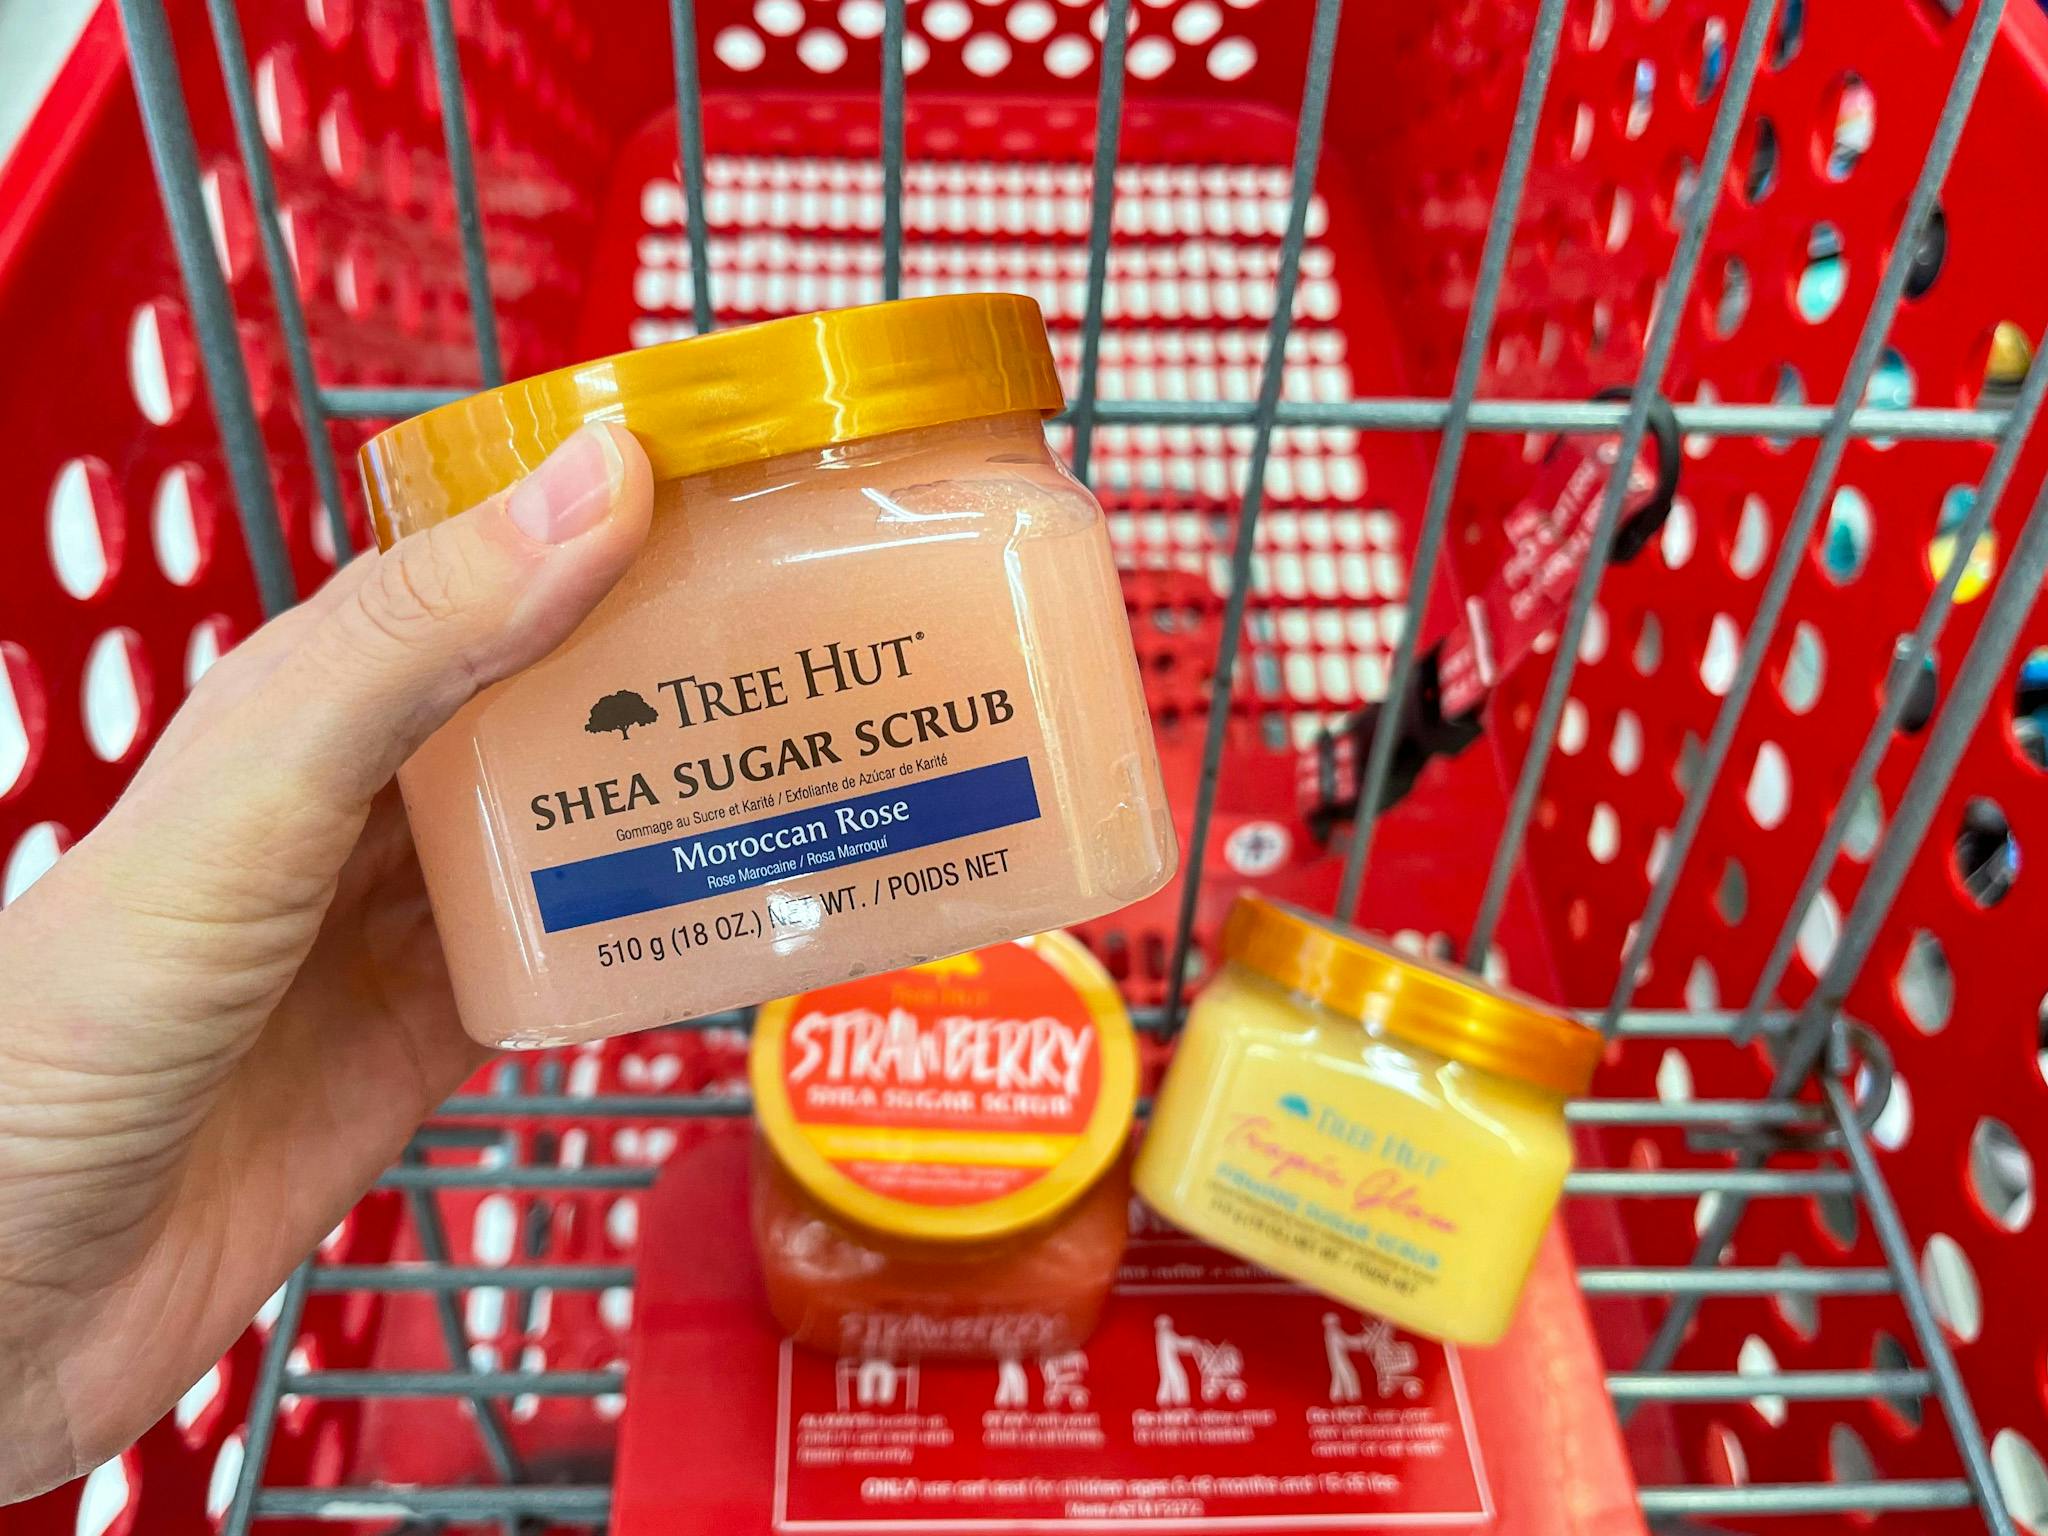 A tree hut shea sugar scrub held with hand in front of a Target shopping cart with two other jars of tree hut shea sugar scrub in it.